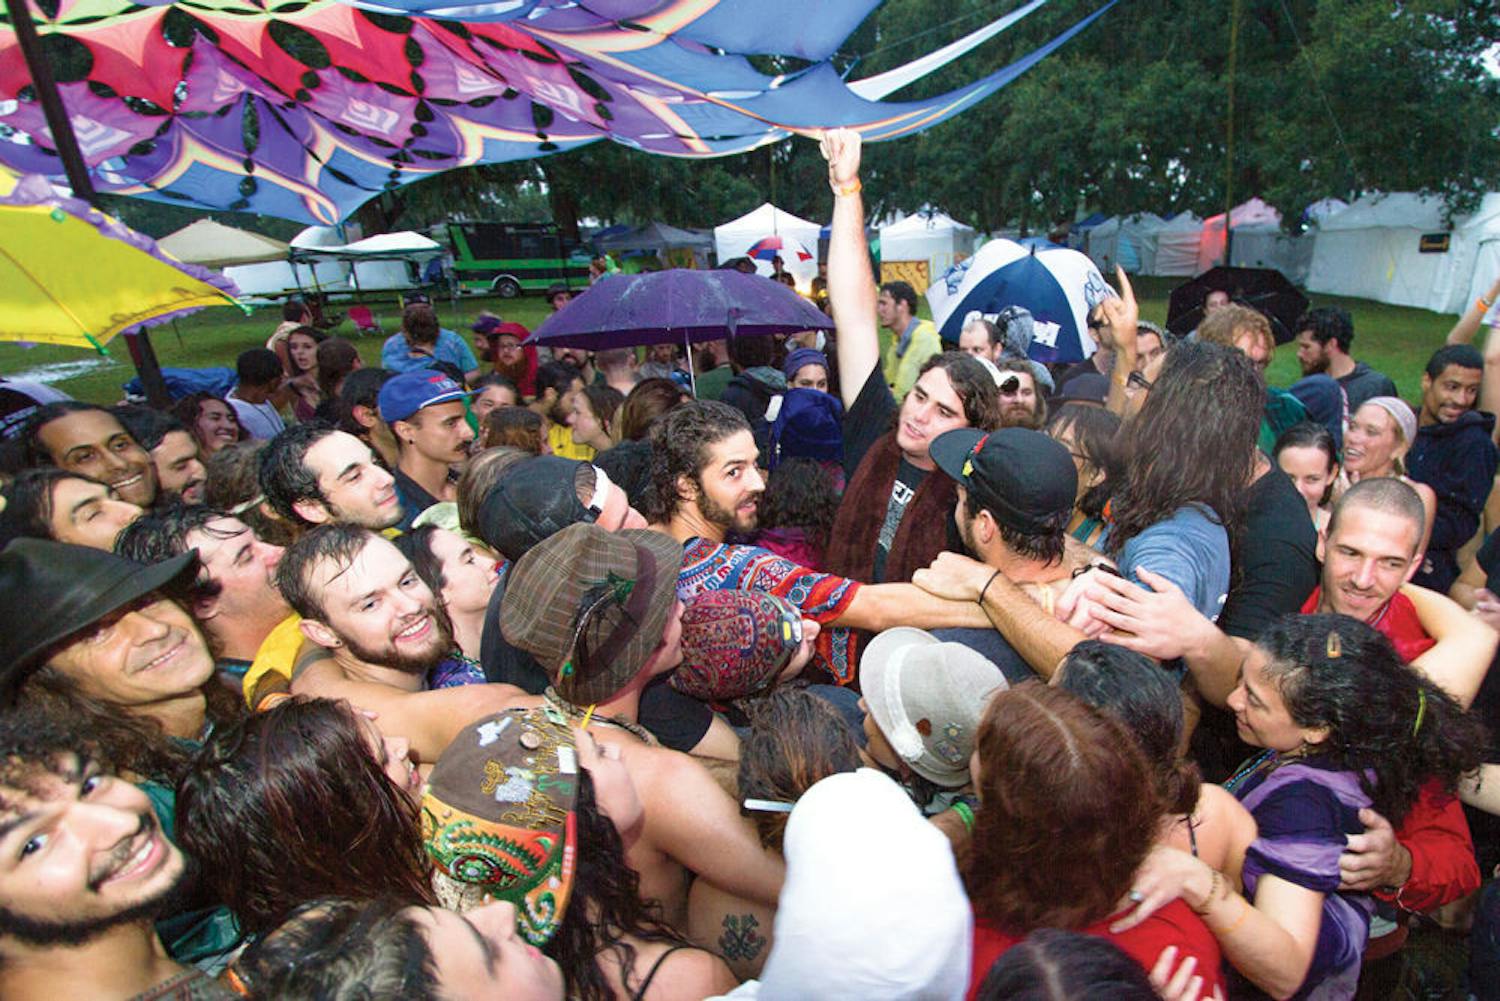 Earthdance attendees huddle together for a group hug at Maddox Ranch in Lakeland, Florida Saturday September 20, 2014.